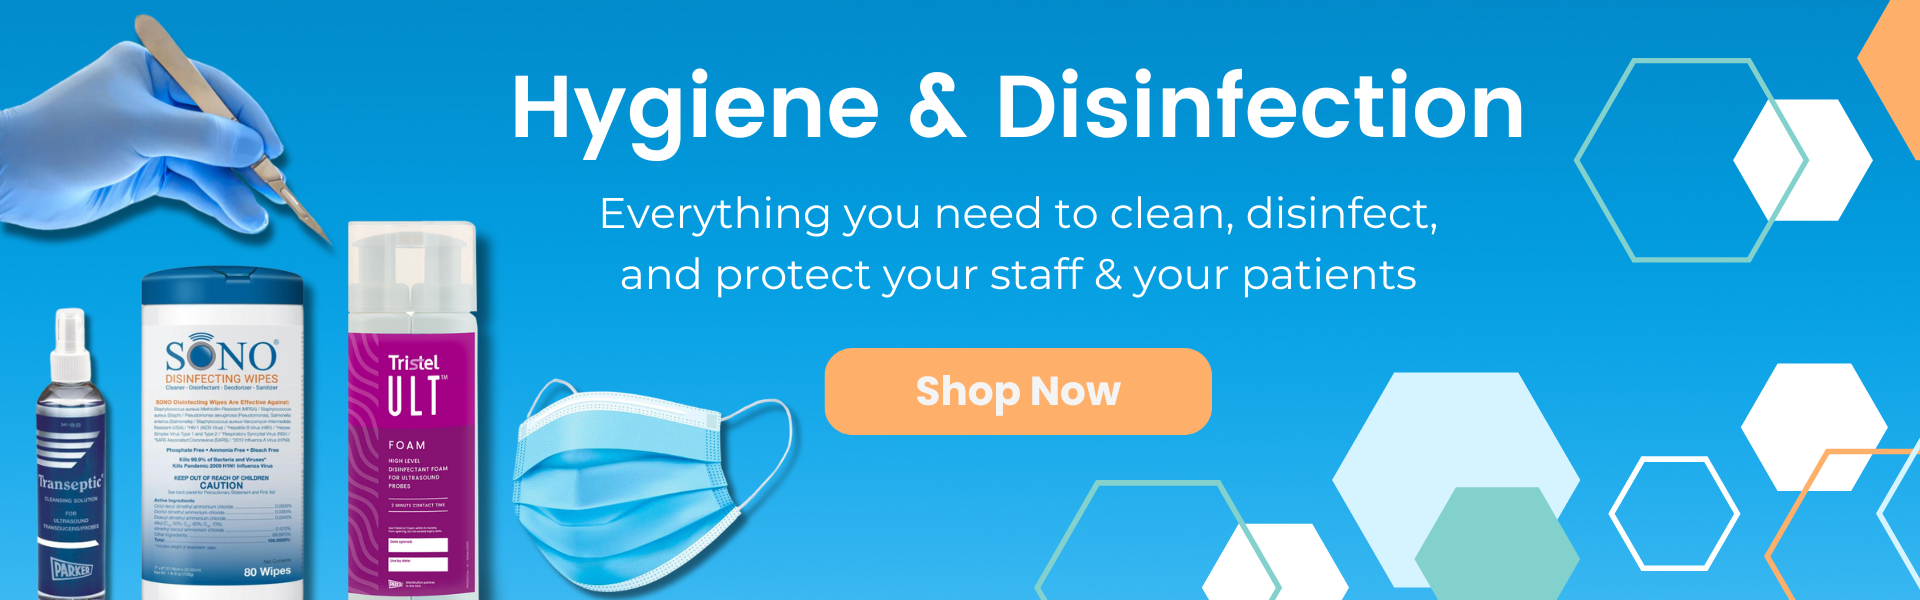 Discover our extensive range for hygiene and disinfection - EDM